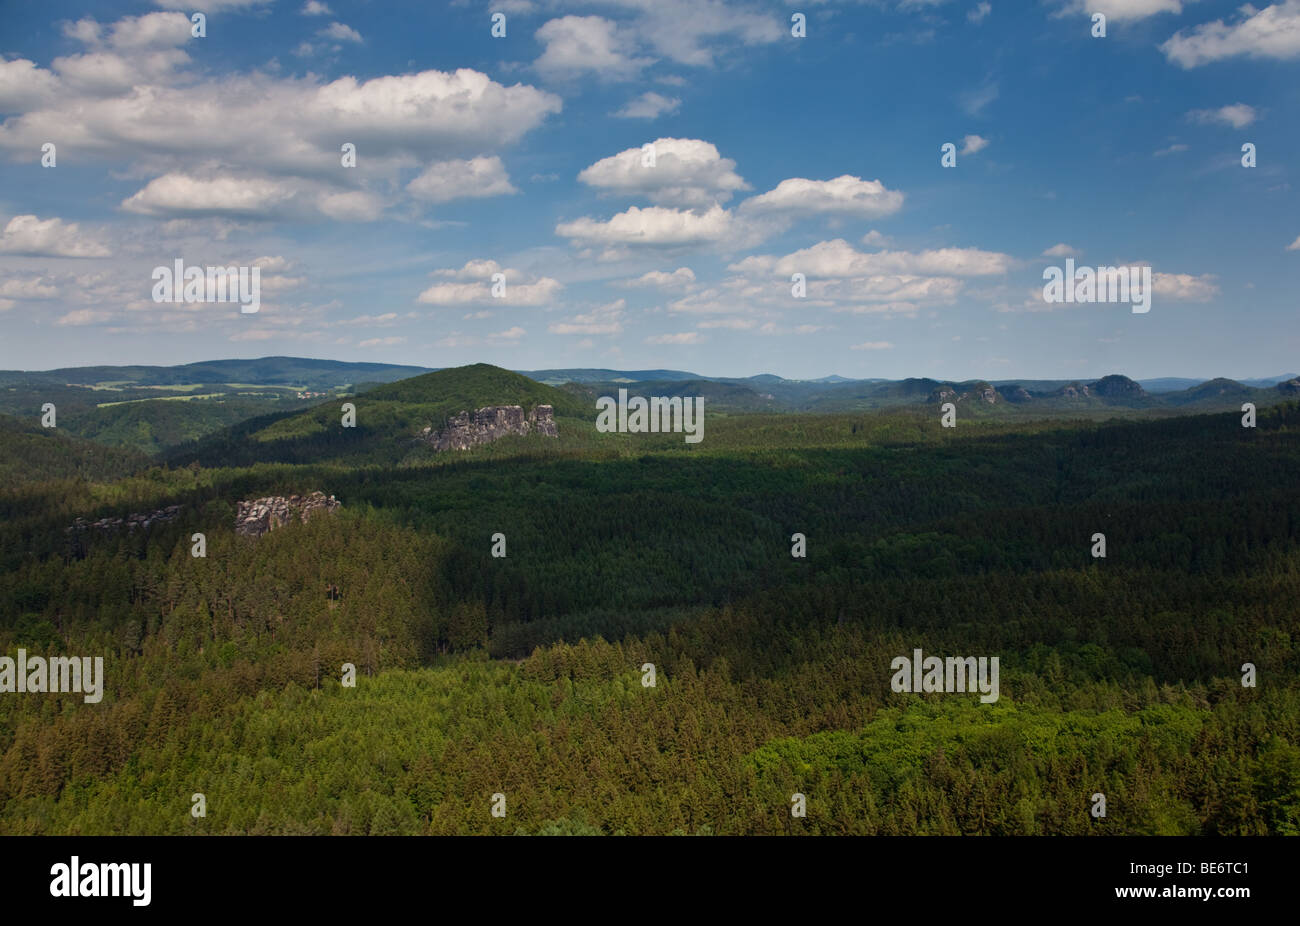 Panoramic view over the scenery of national park 'Sächsische Schweiz' in Saxony, Germany Stock Photo